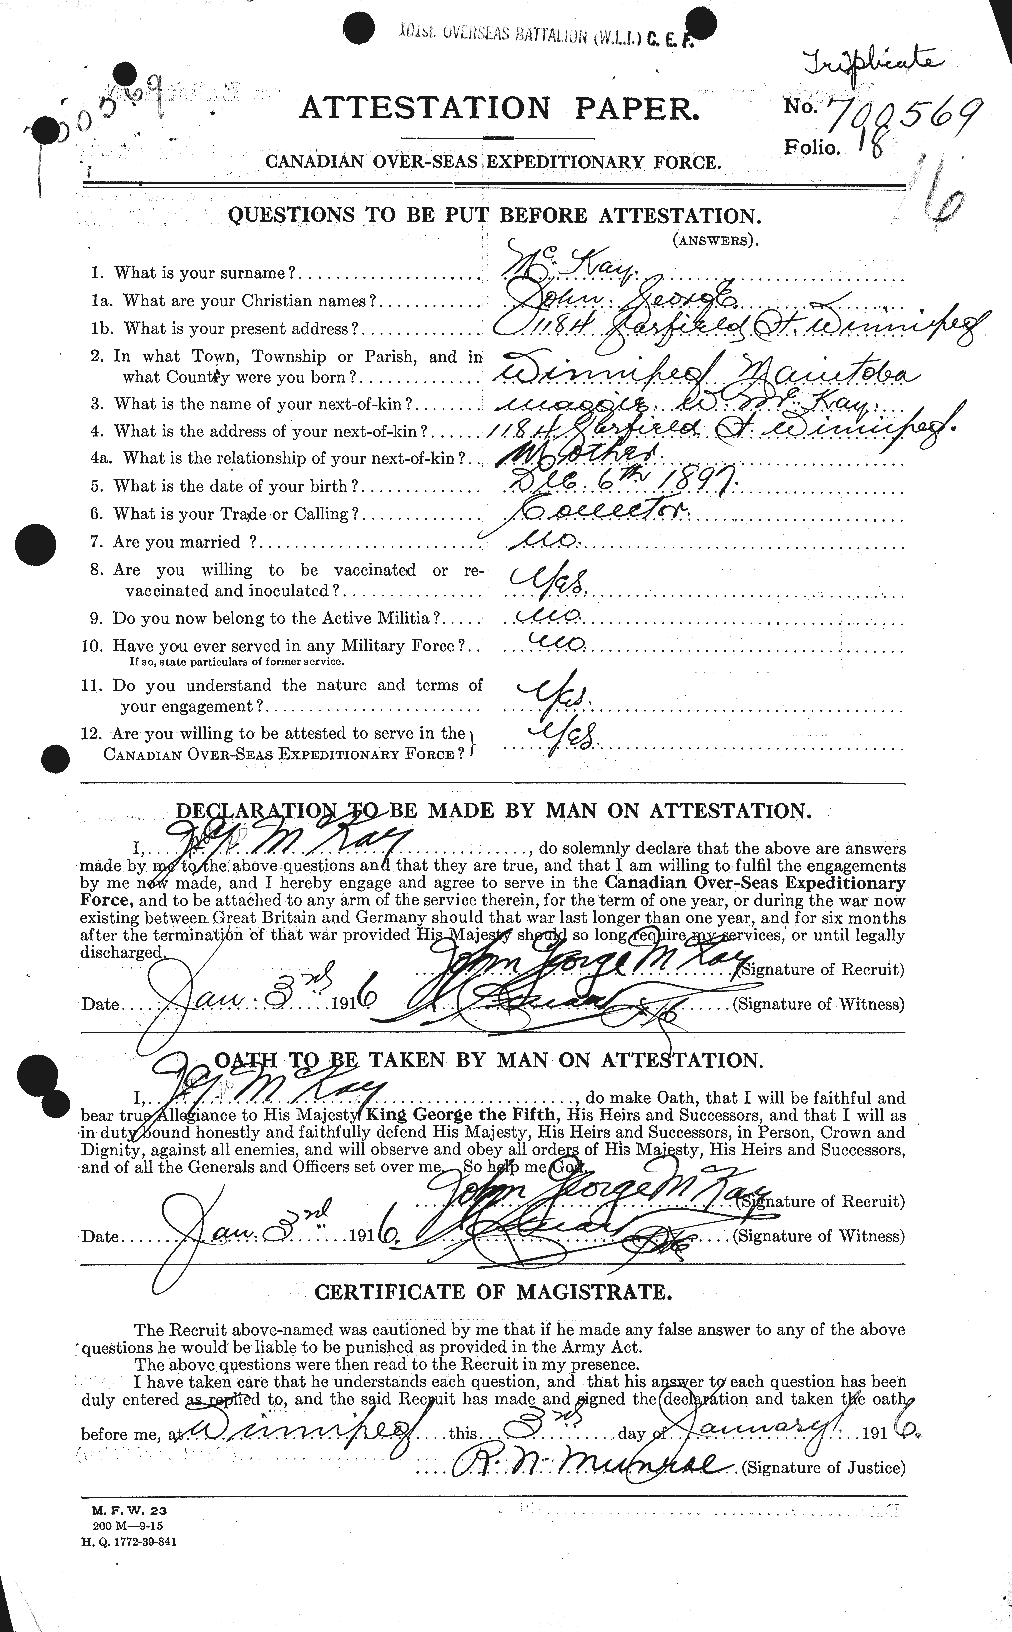 Personnel Records of the First World War - CEF 527057a